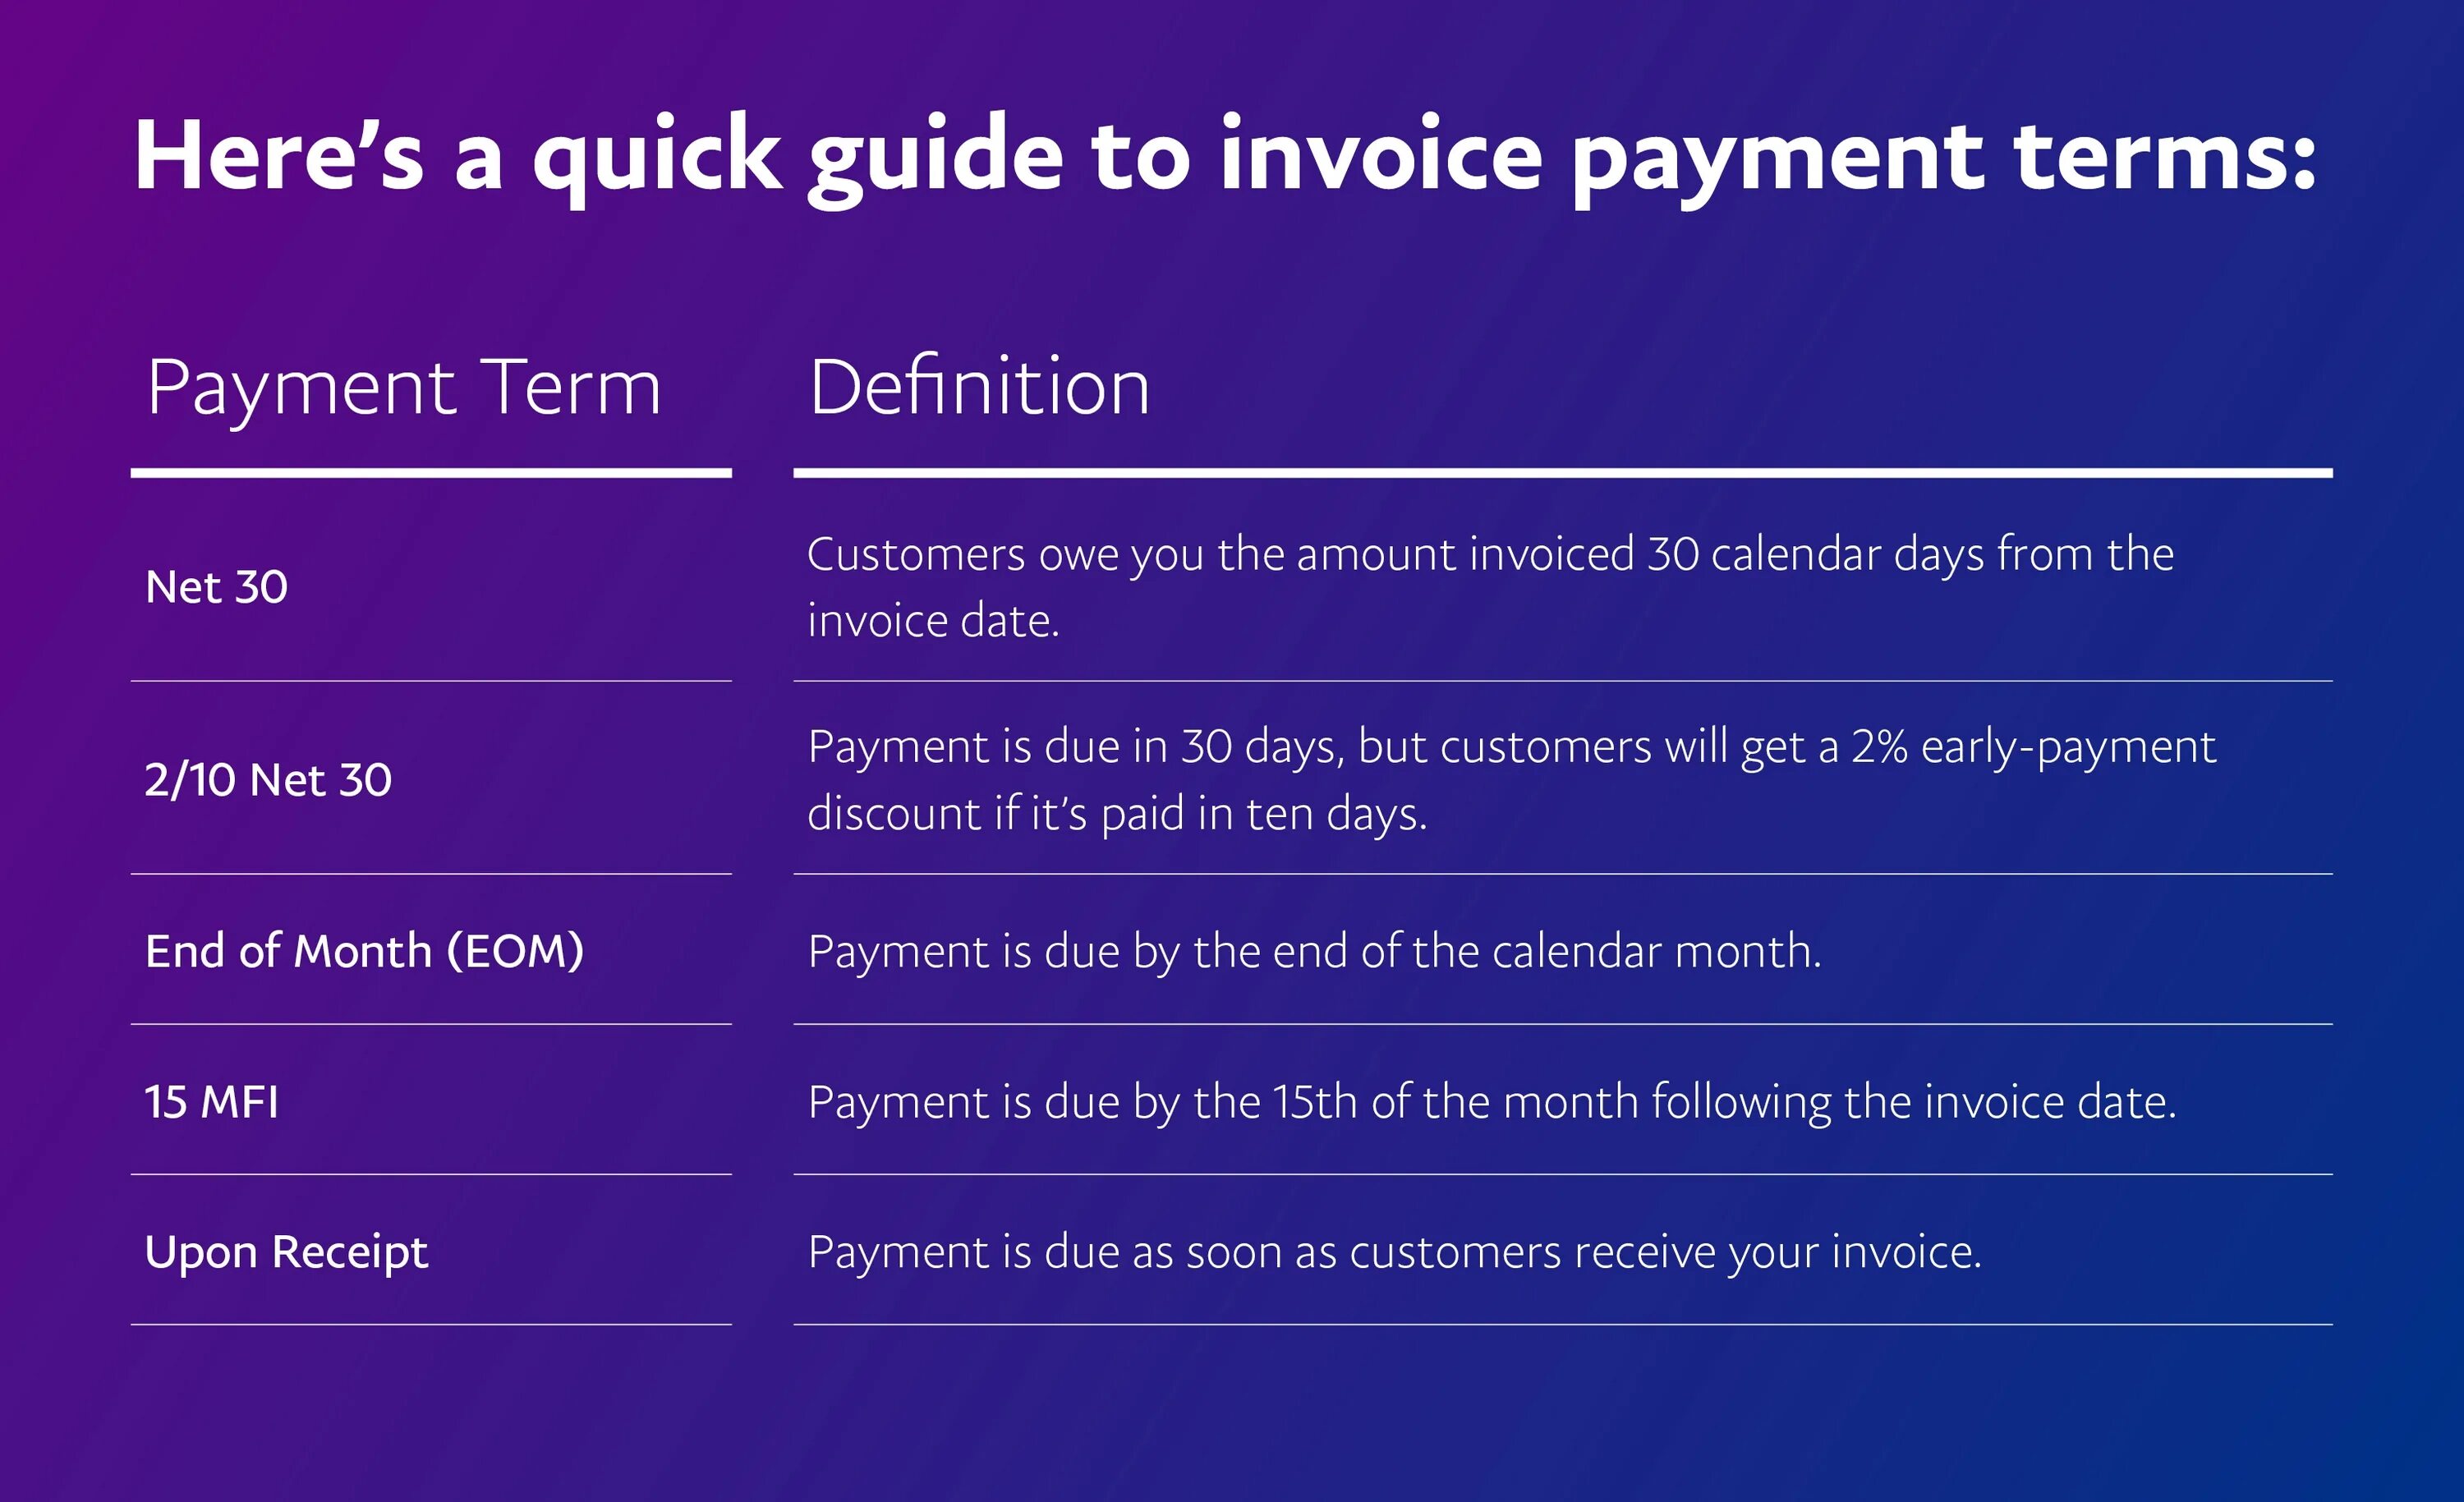 Term payment. Payment terms in Invoice. Payment terms в инвойсе. Payment terms net 30.